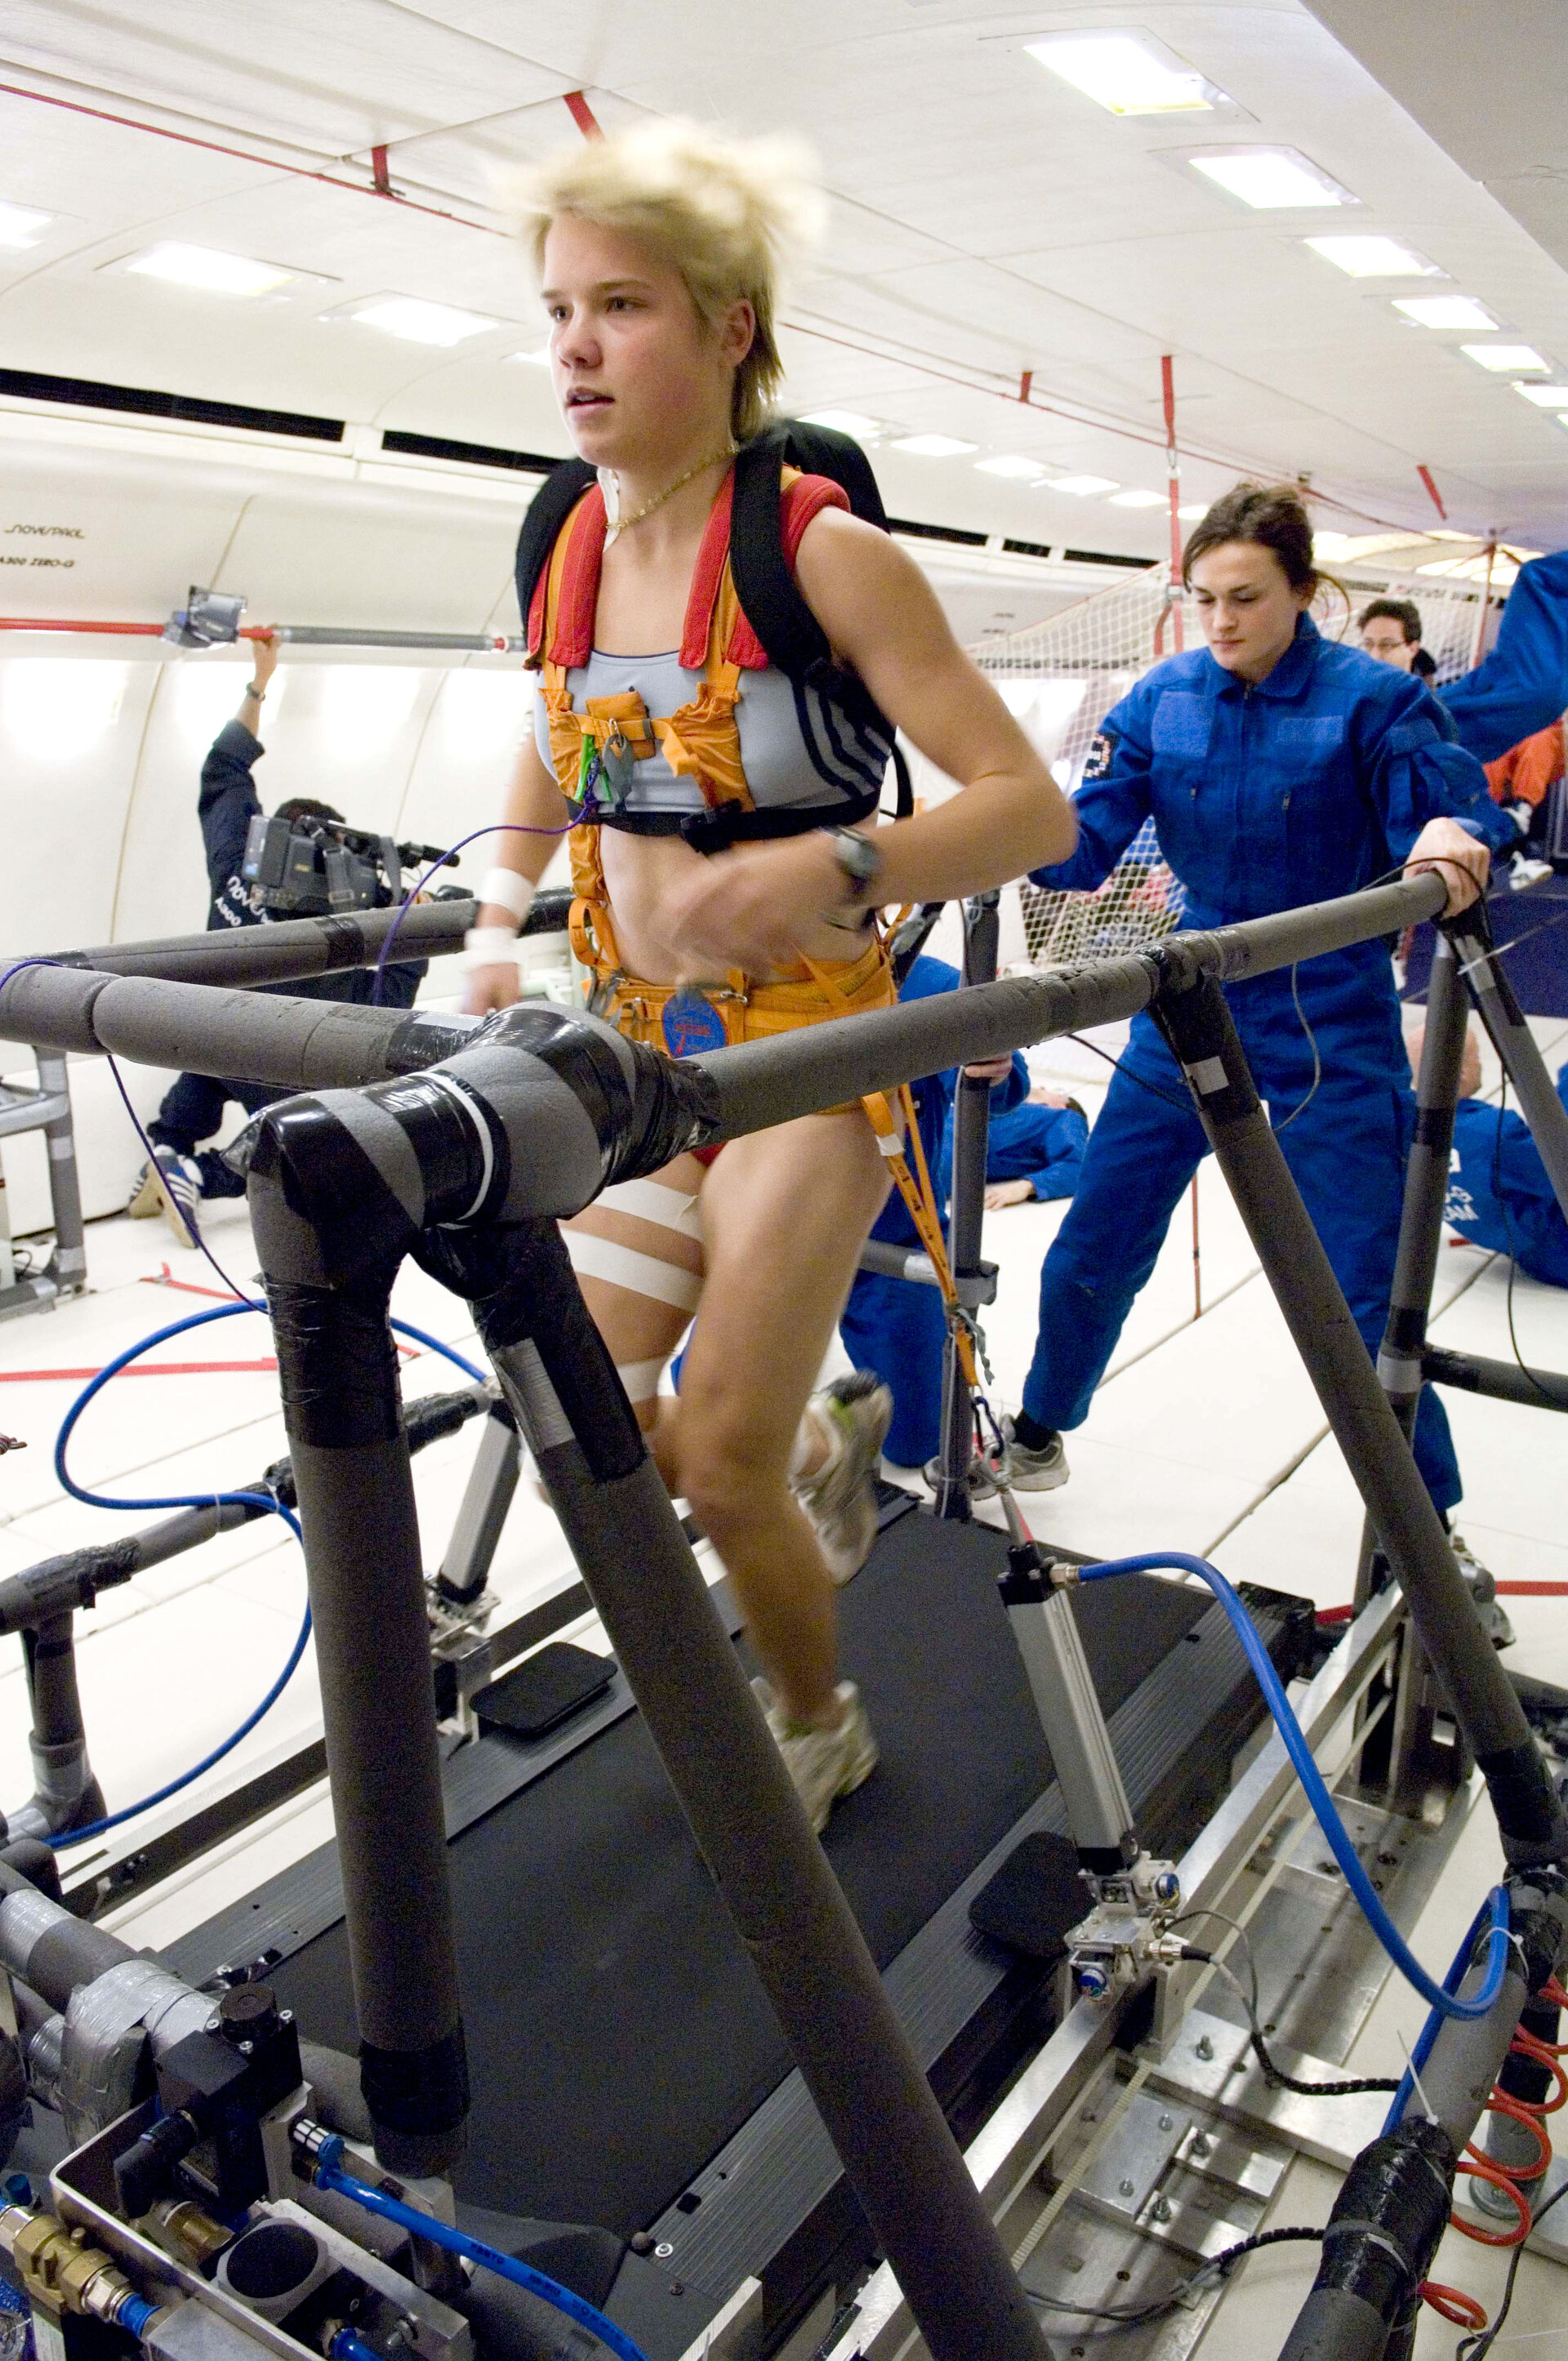 Physiology experiment during the 46th Parabolic Flight Campaign